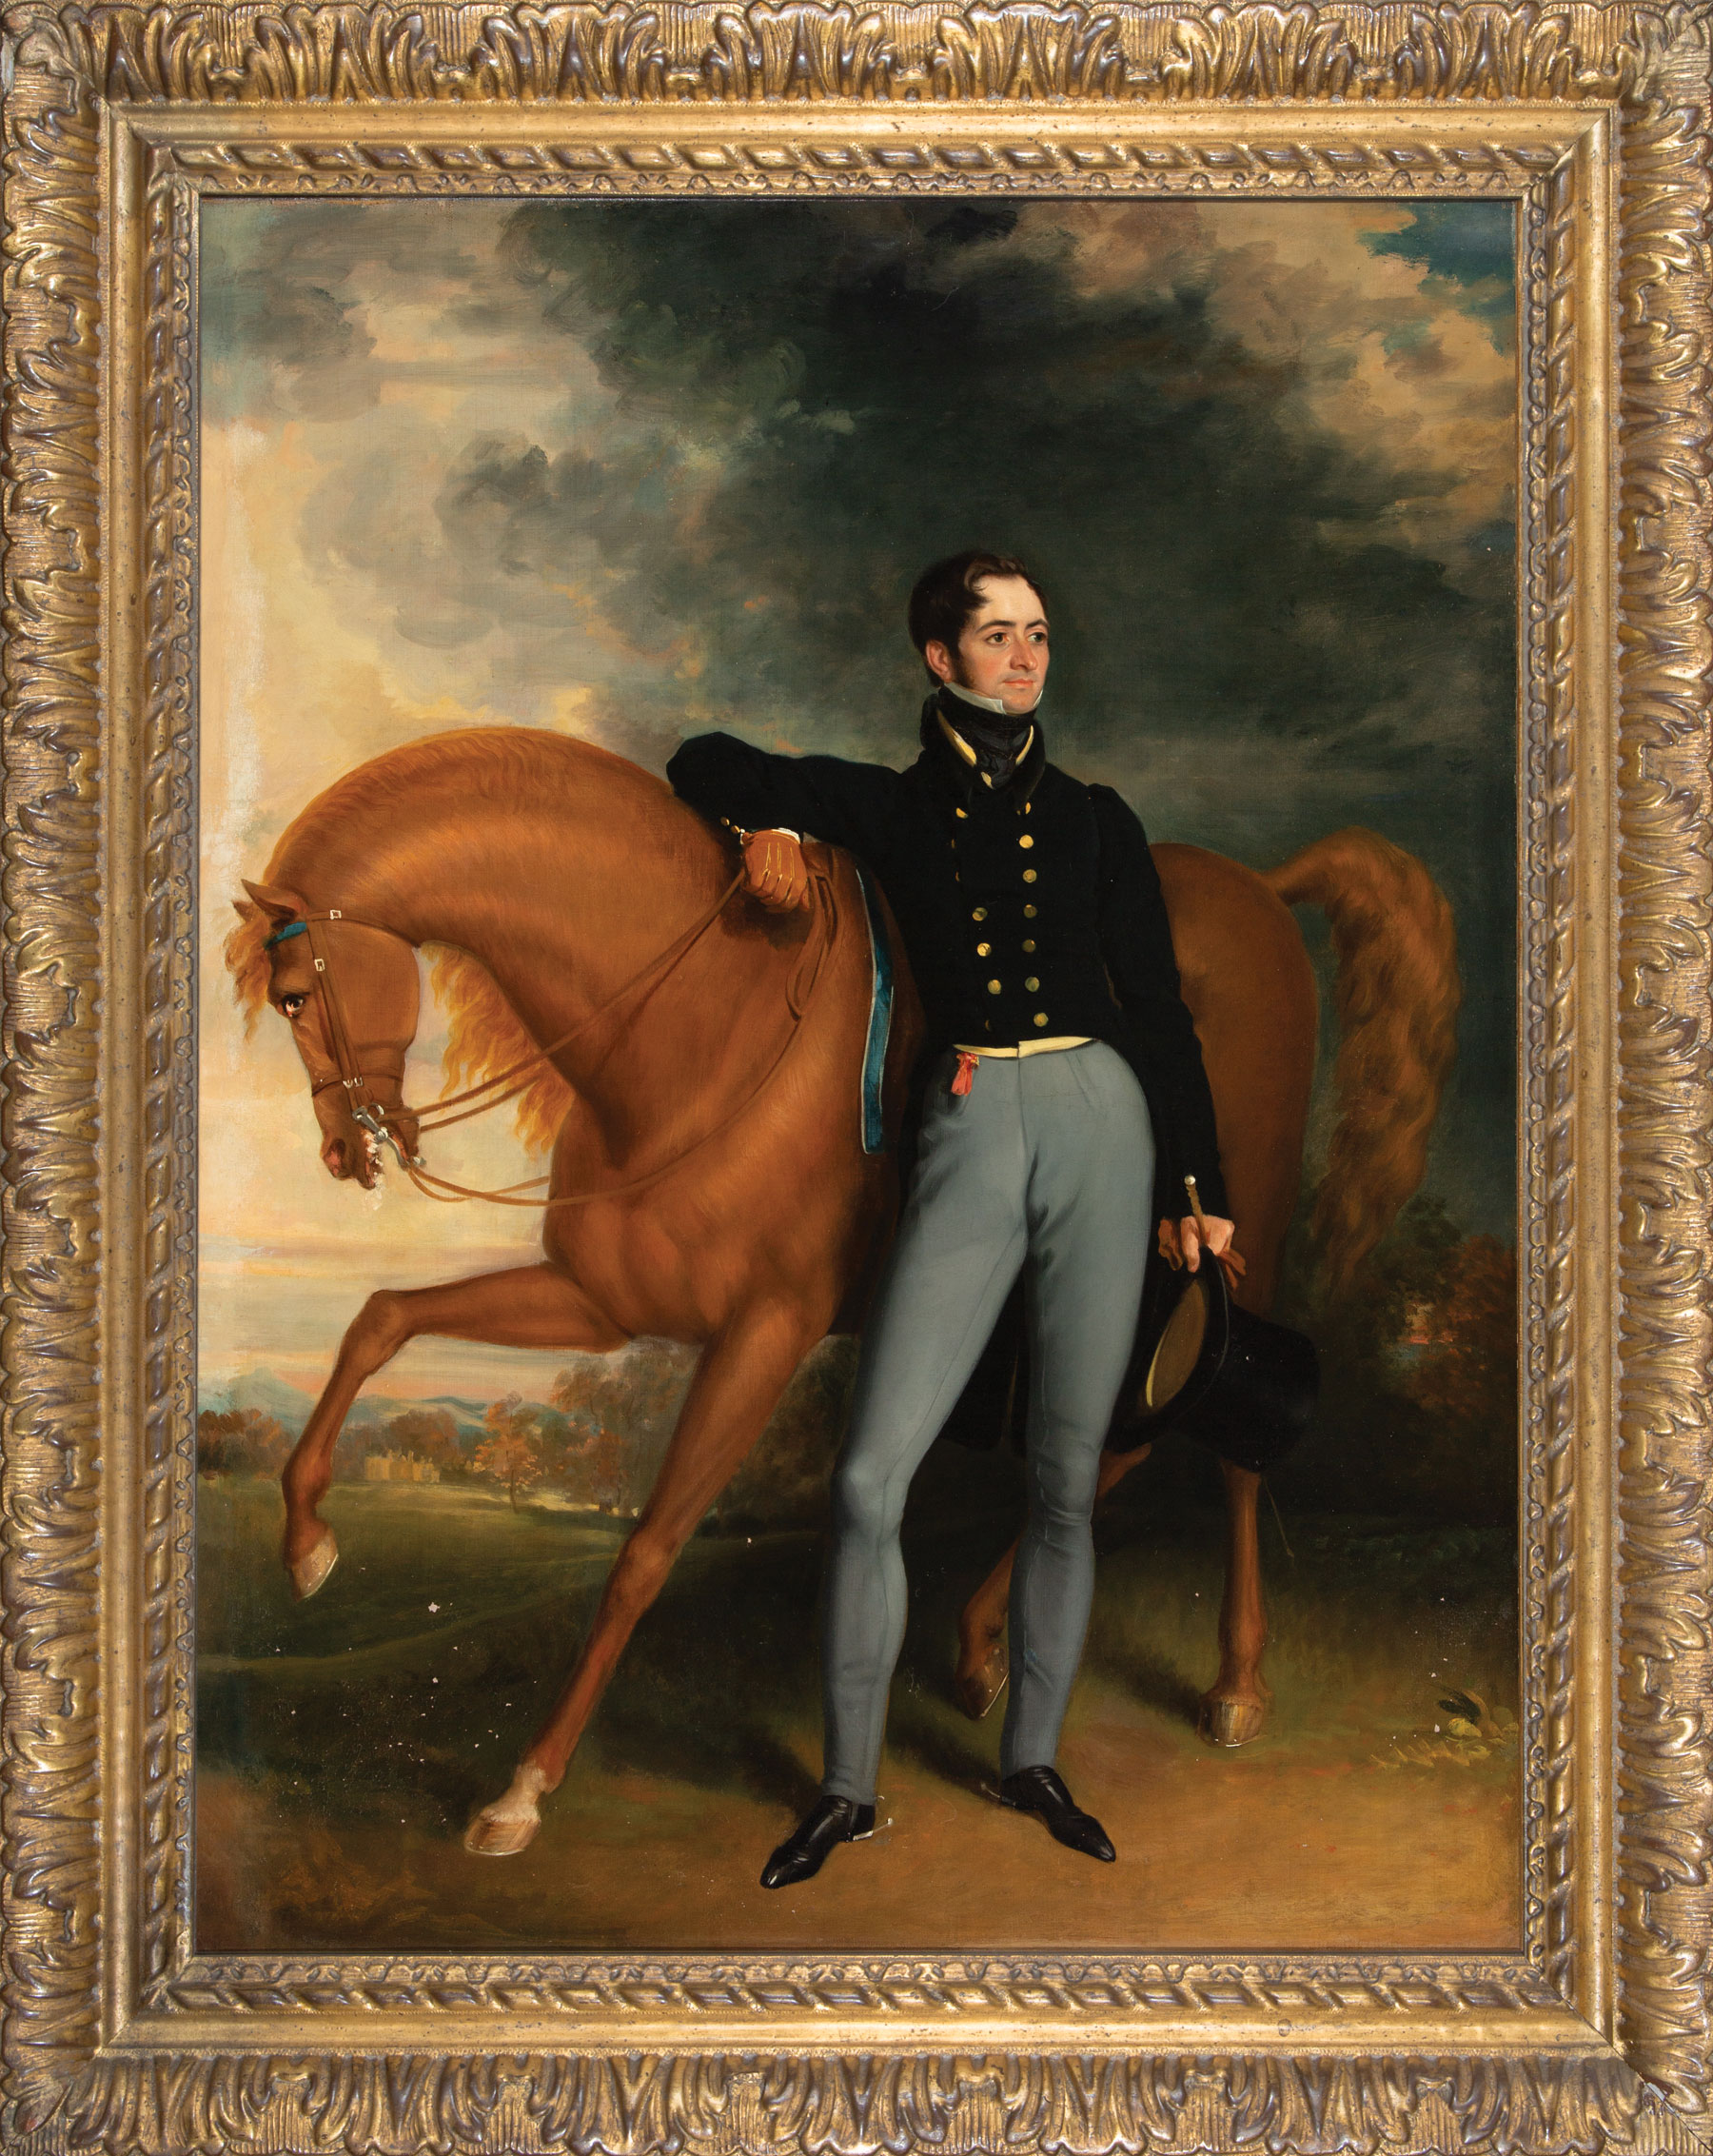 British School, 19th c ., "Portrait of a Gentleman with Horse", oil on canvas, unsigned, 35 in. x - Image 2 of 3